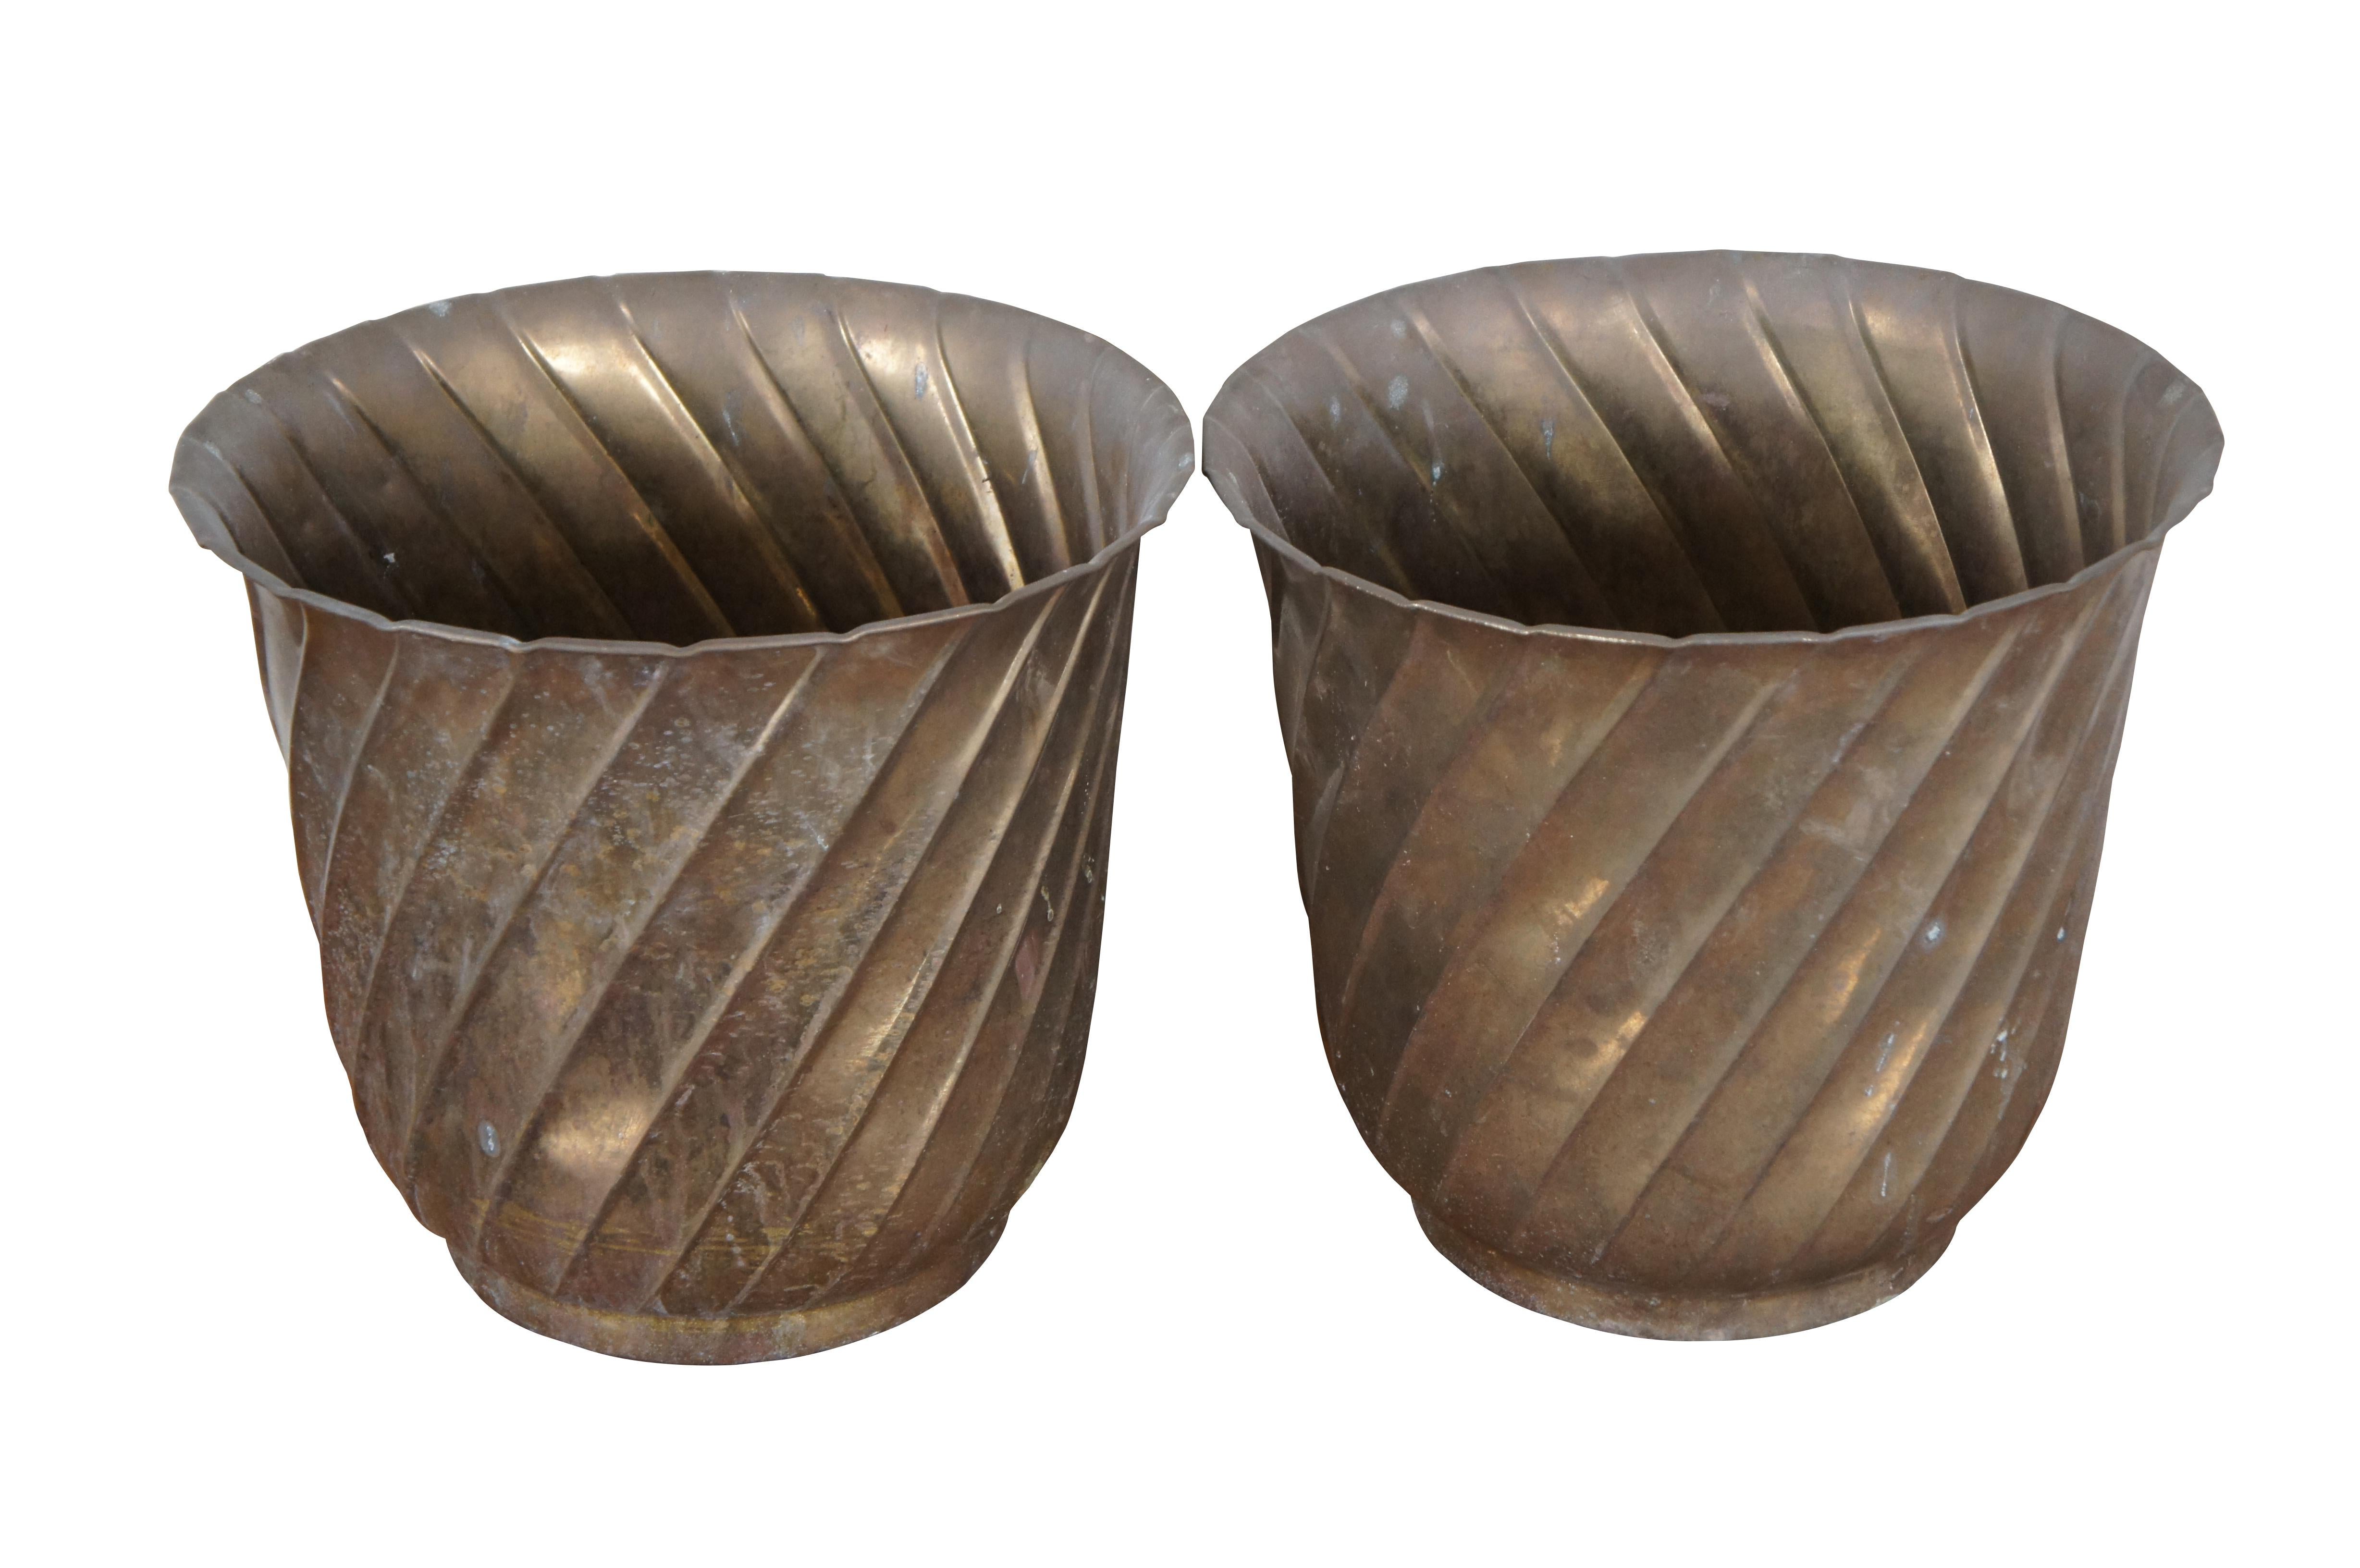 Two vintage brass planters / cachepots or garbage / trash cans featuring spiral design with flared rim.  Made in India.

Dimensions:
12